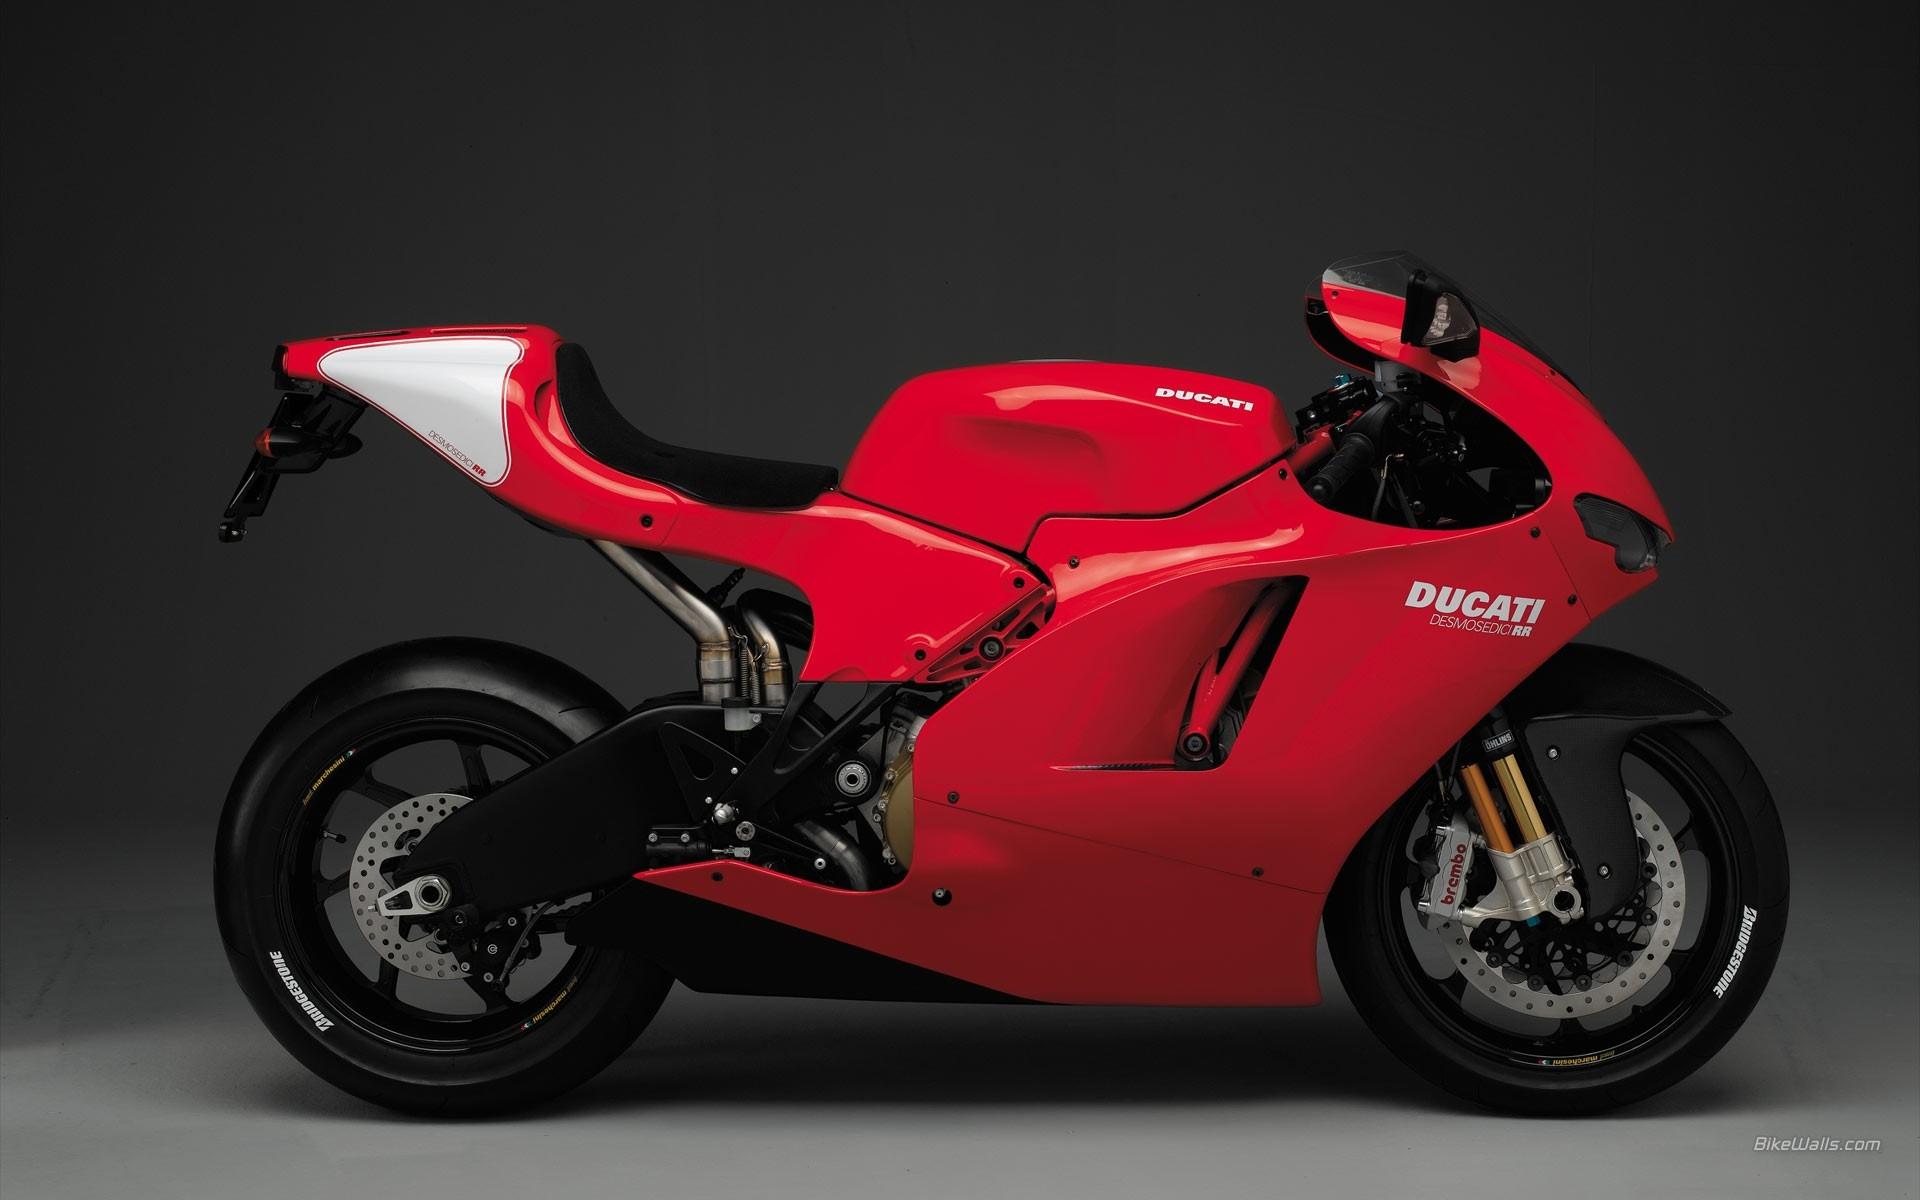 Download 1920x1200 Ducati Desmosedici Rr, Red, Side View, Motorcycle